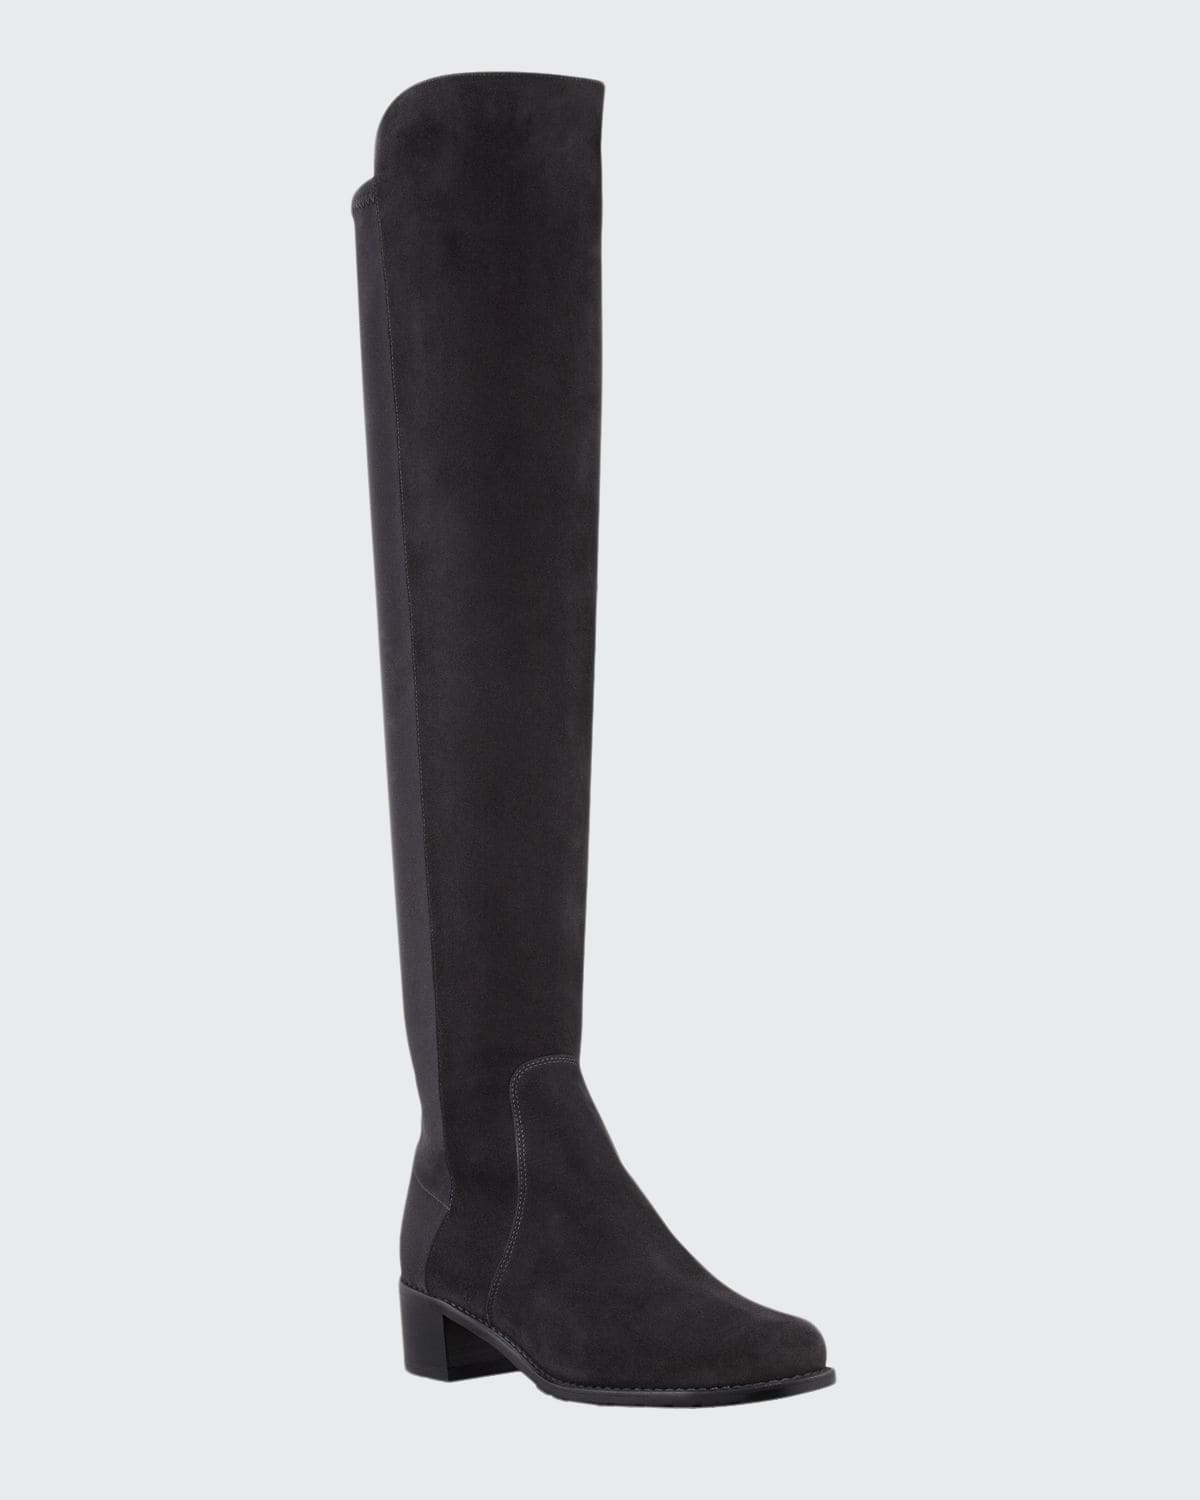 Reserve Suede Stretch Over-the-Knee Boot, Black